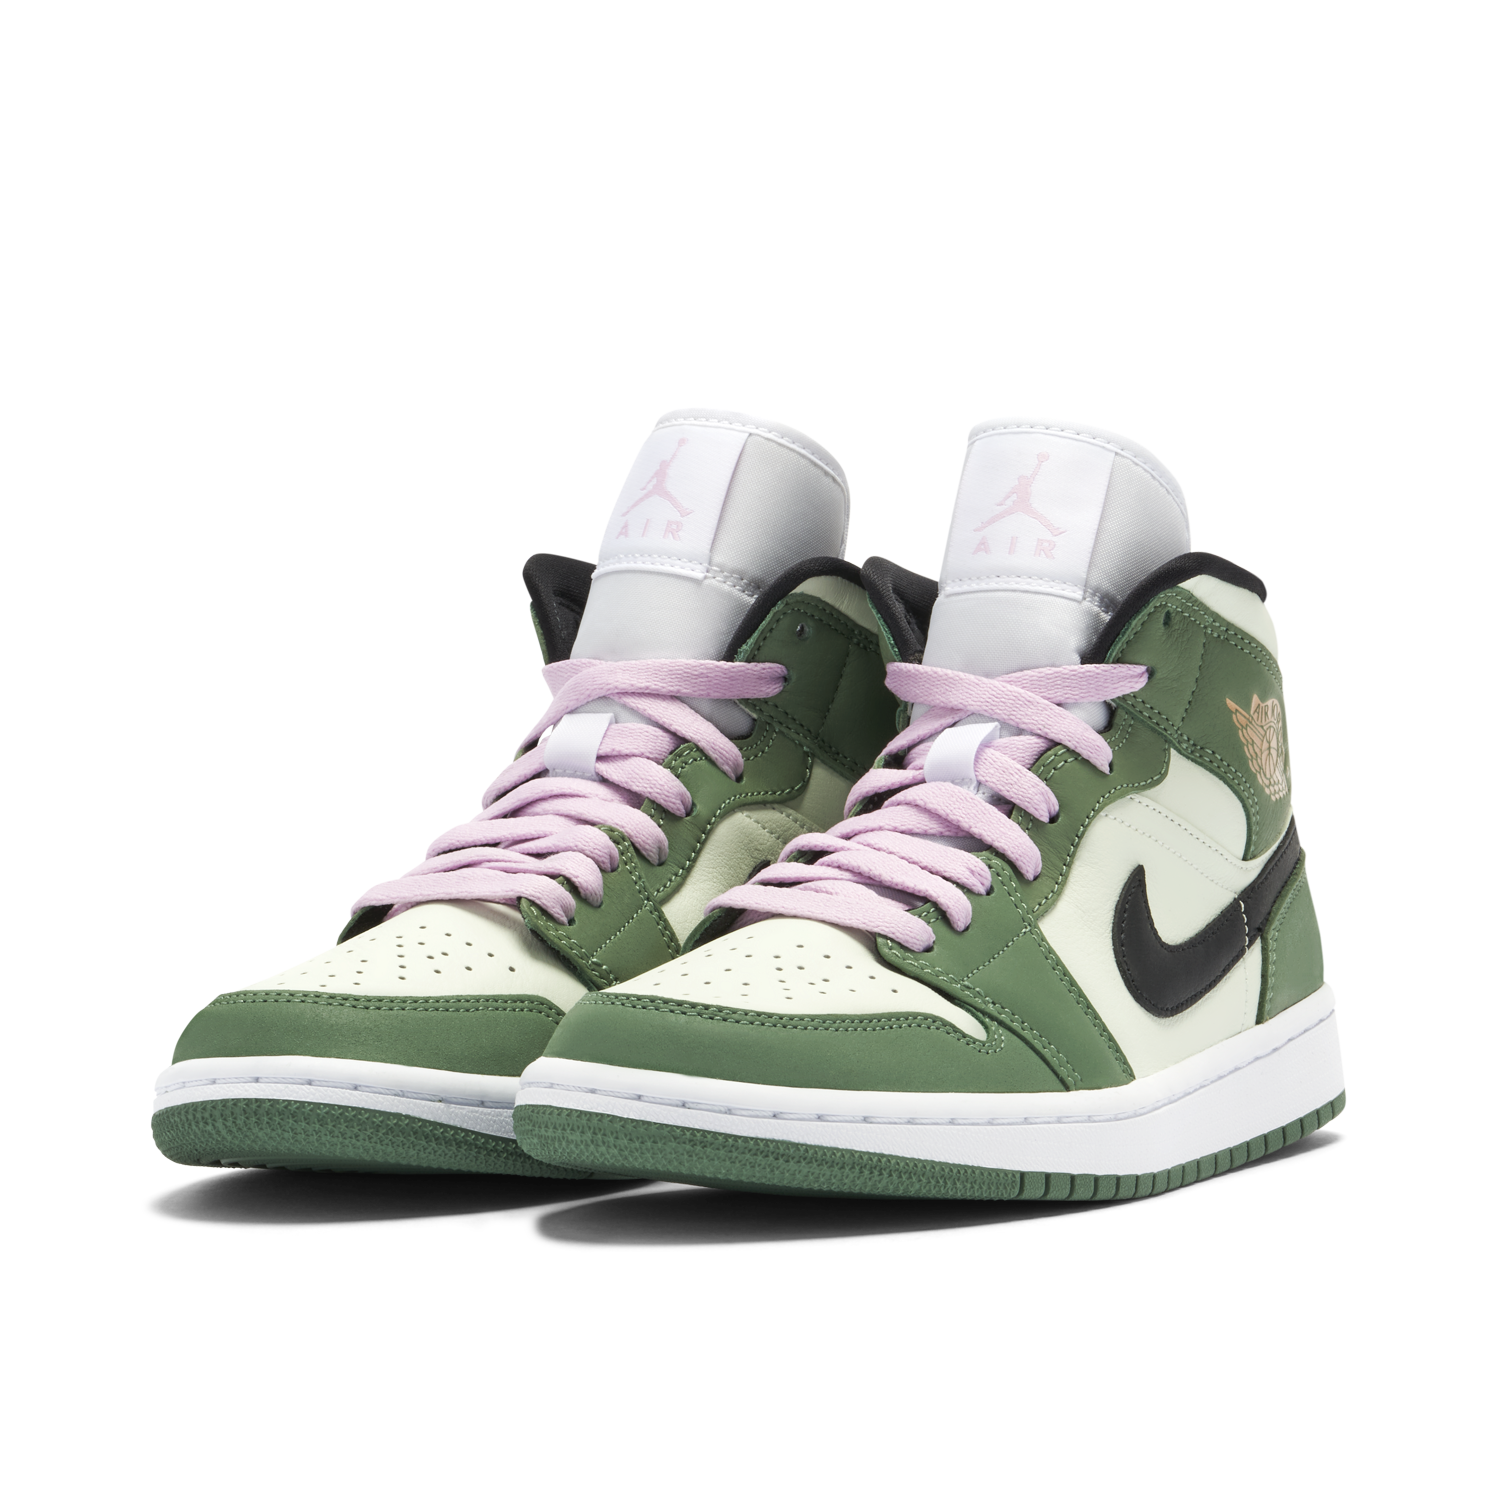 green jordan 1s with pink laces